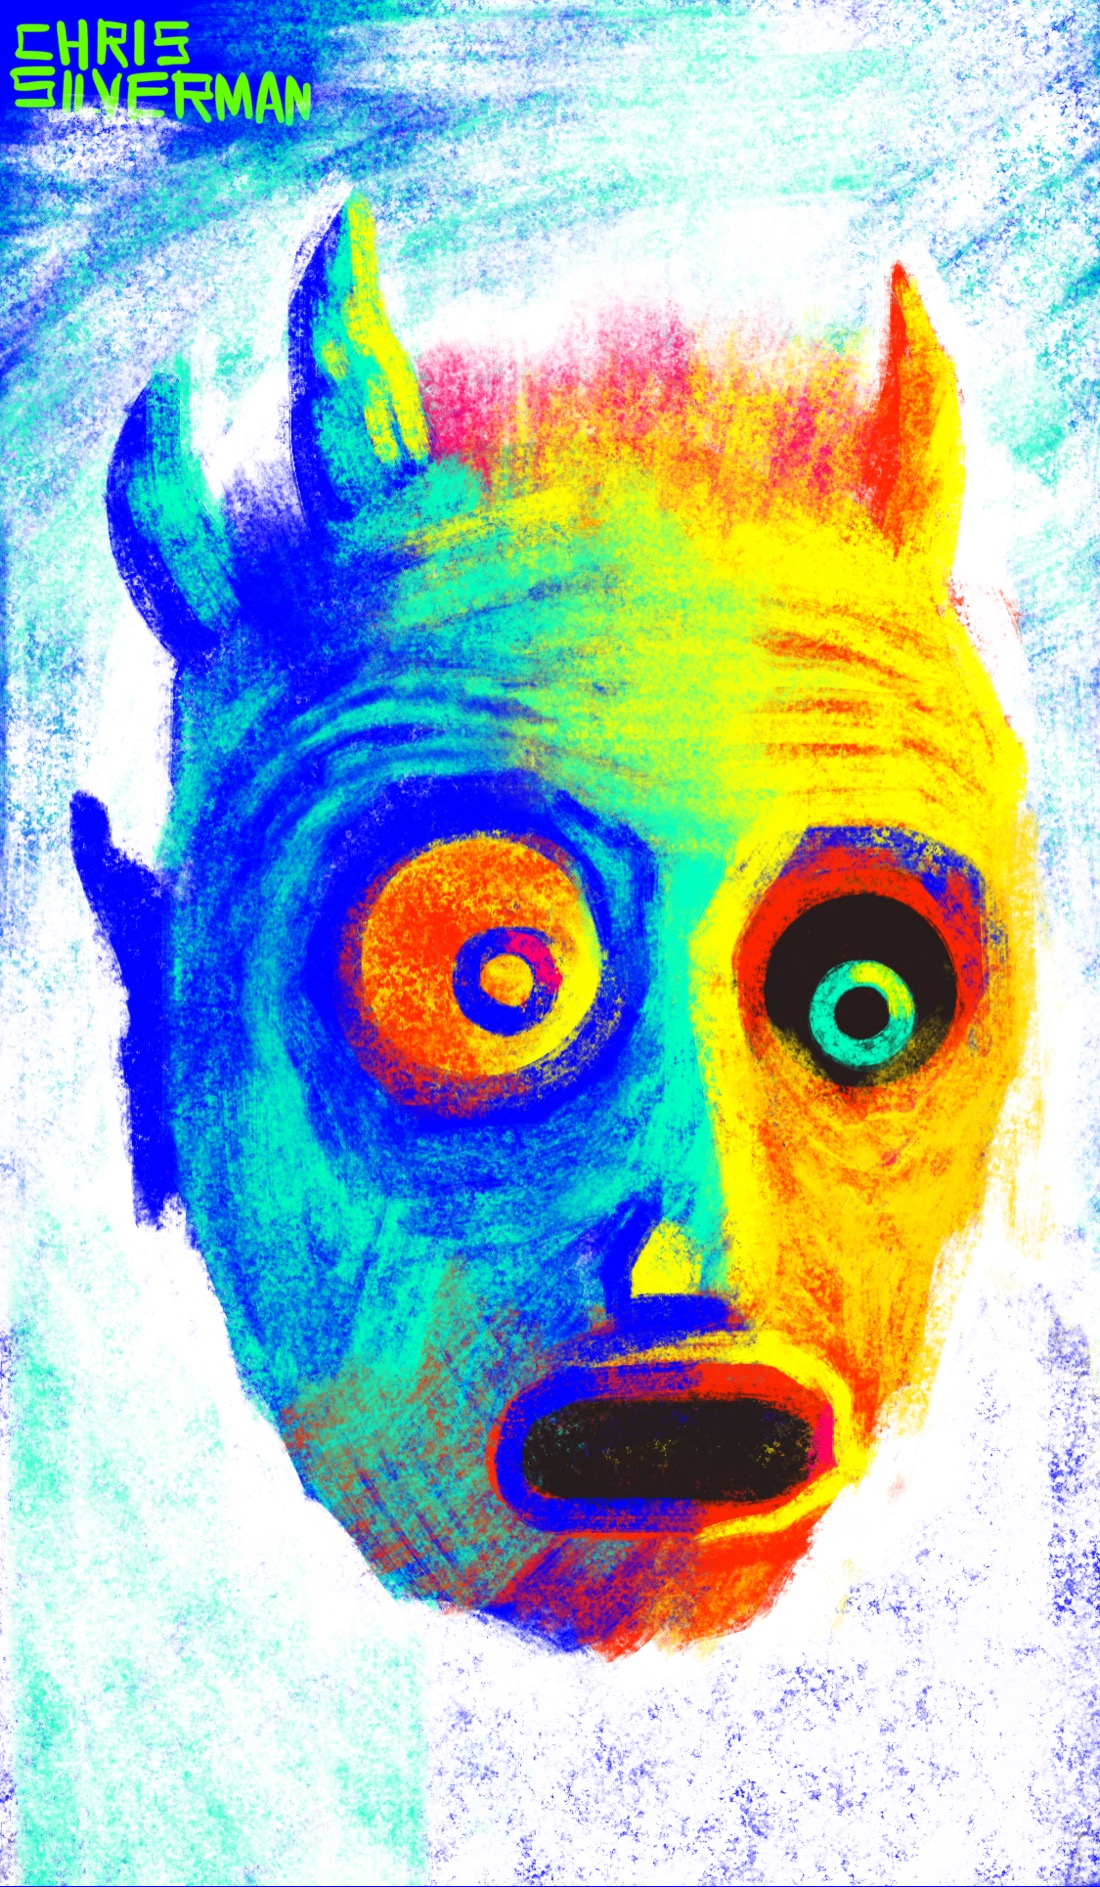 A head, rendered in a series of bright colors: red, bright, yellow, blue, crimson. The head is floating in space on a white textured background. Its mouth is open, its eyes are wide, and it has a surprised expression. It has three horns and bristly crimson hair. It looks like a monster.